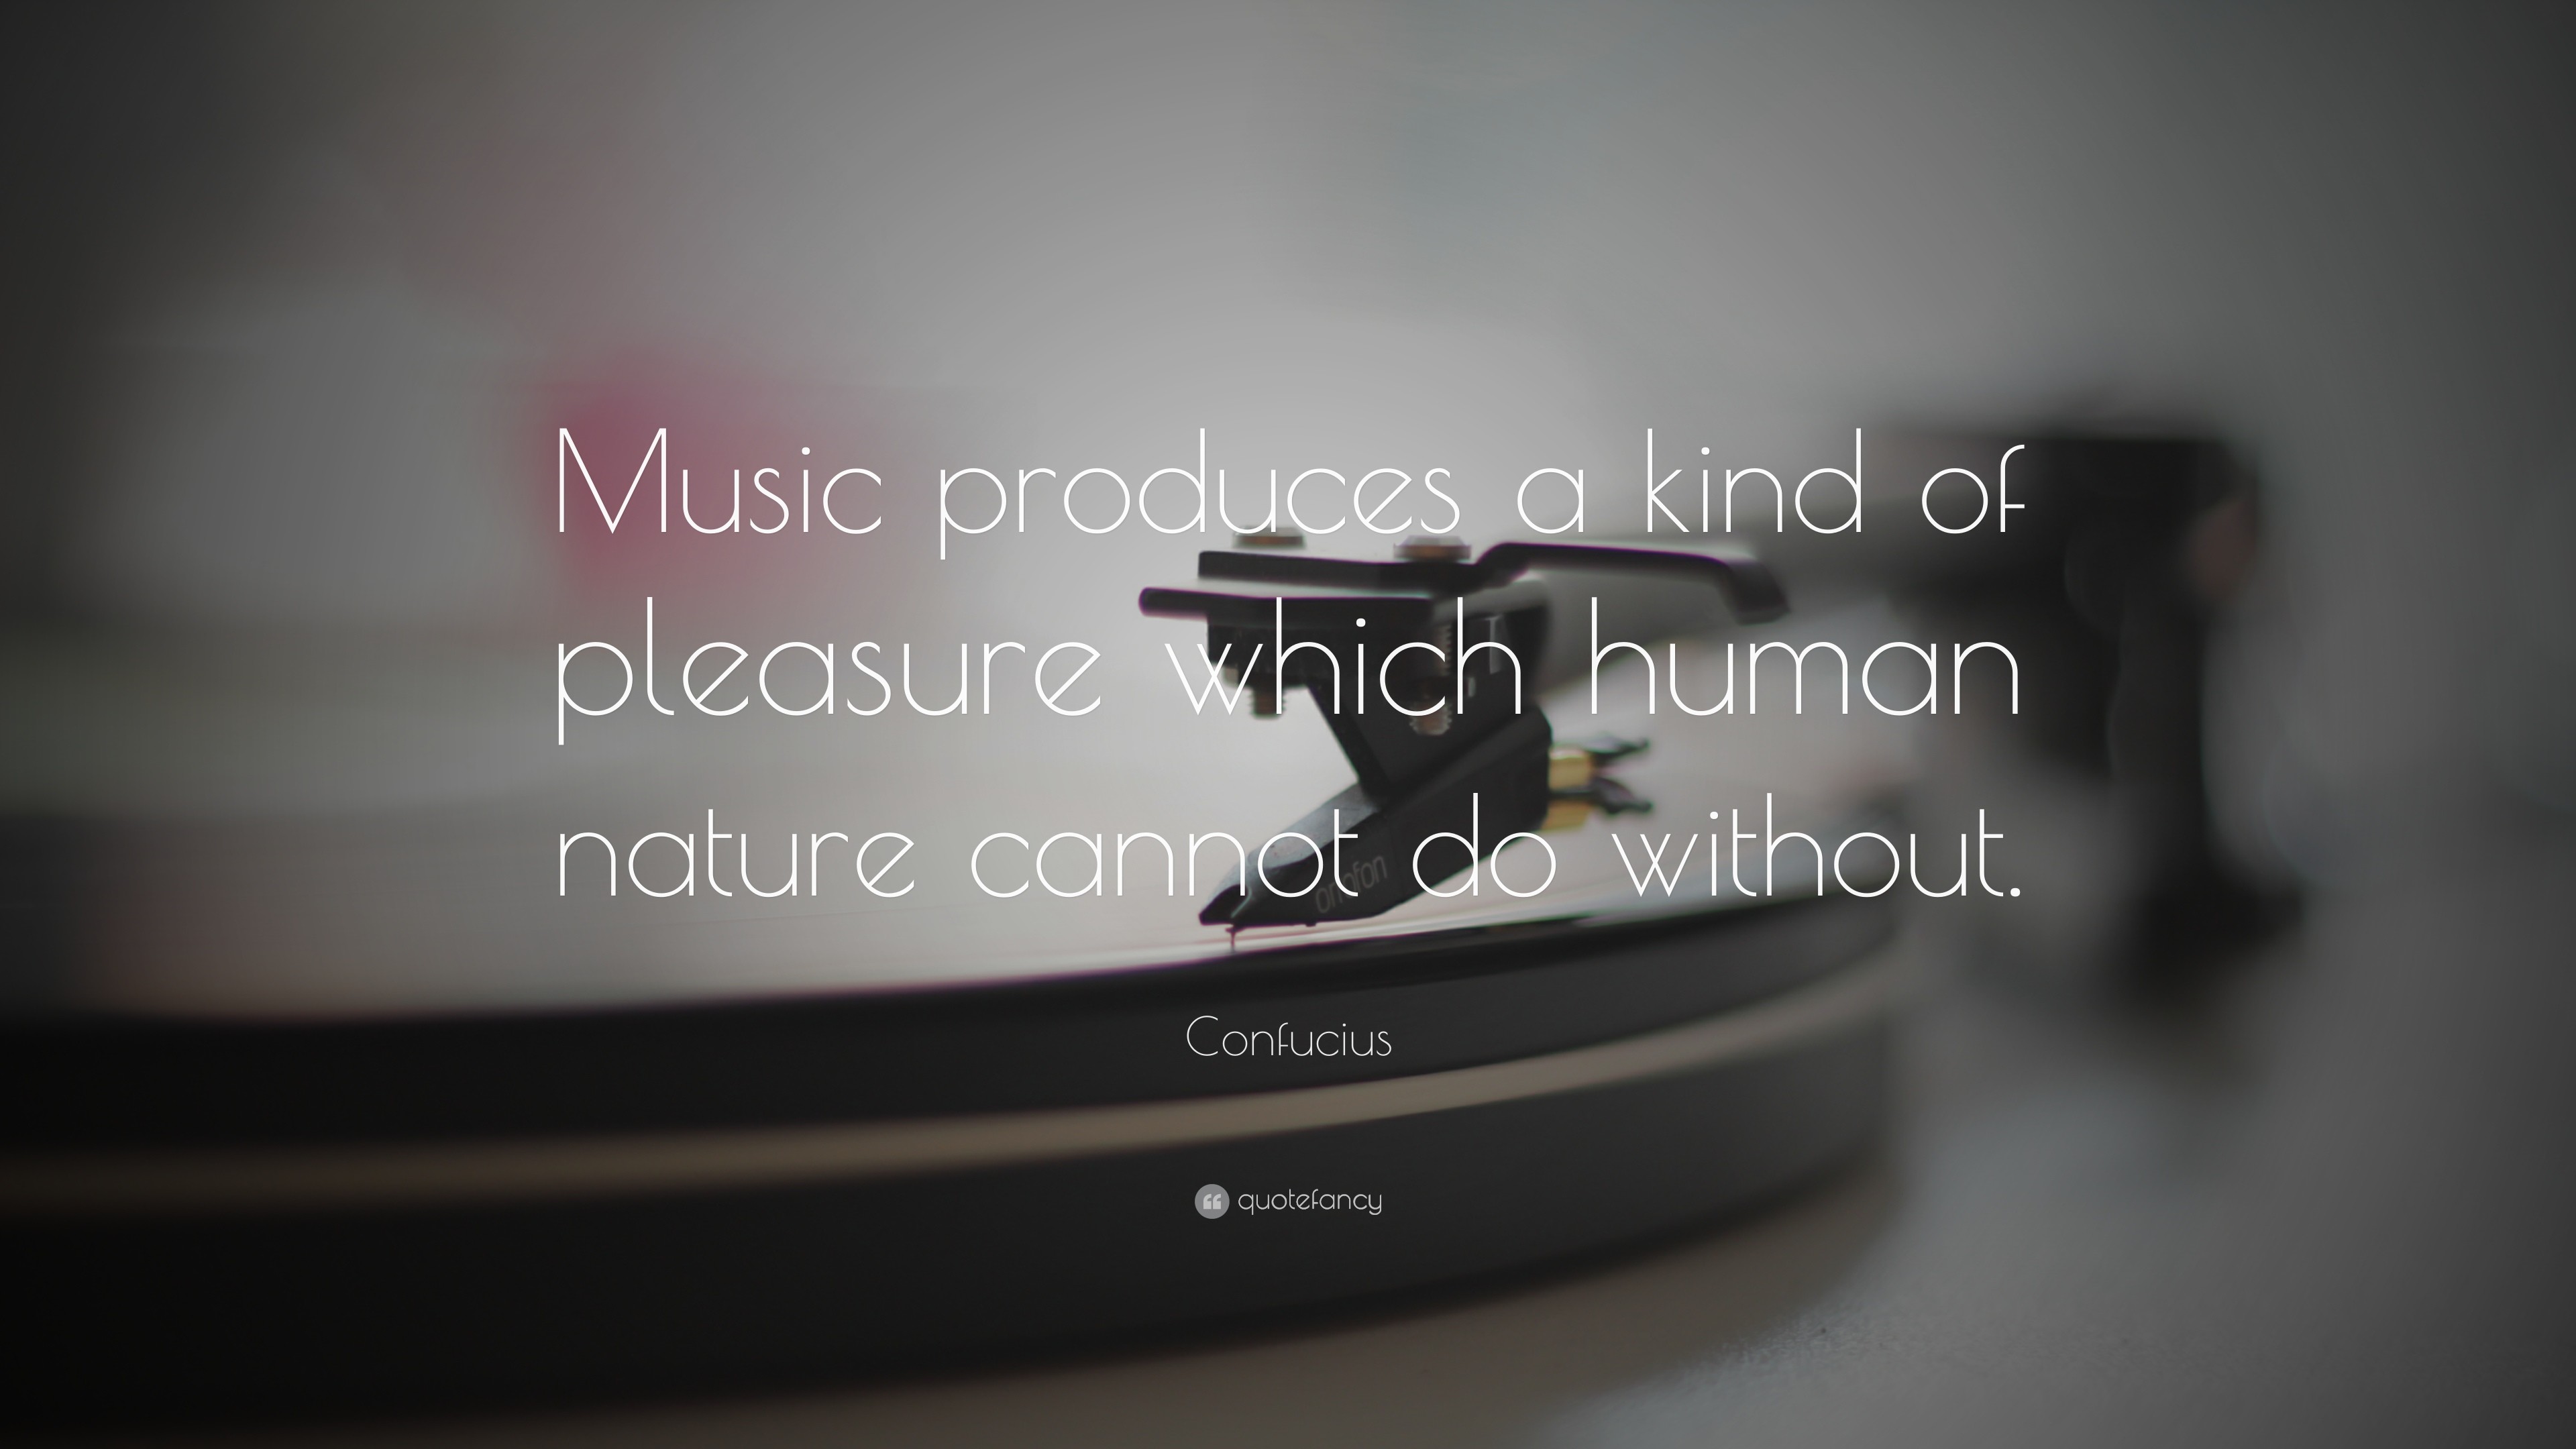 3840x2160 Wisdom Quotes: “Music produces a kind of pleasure which human nature cannot  do without